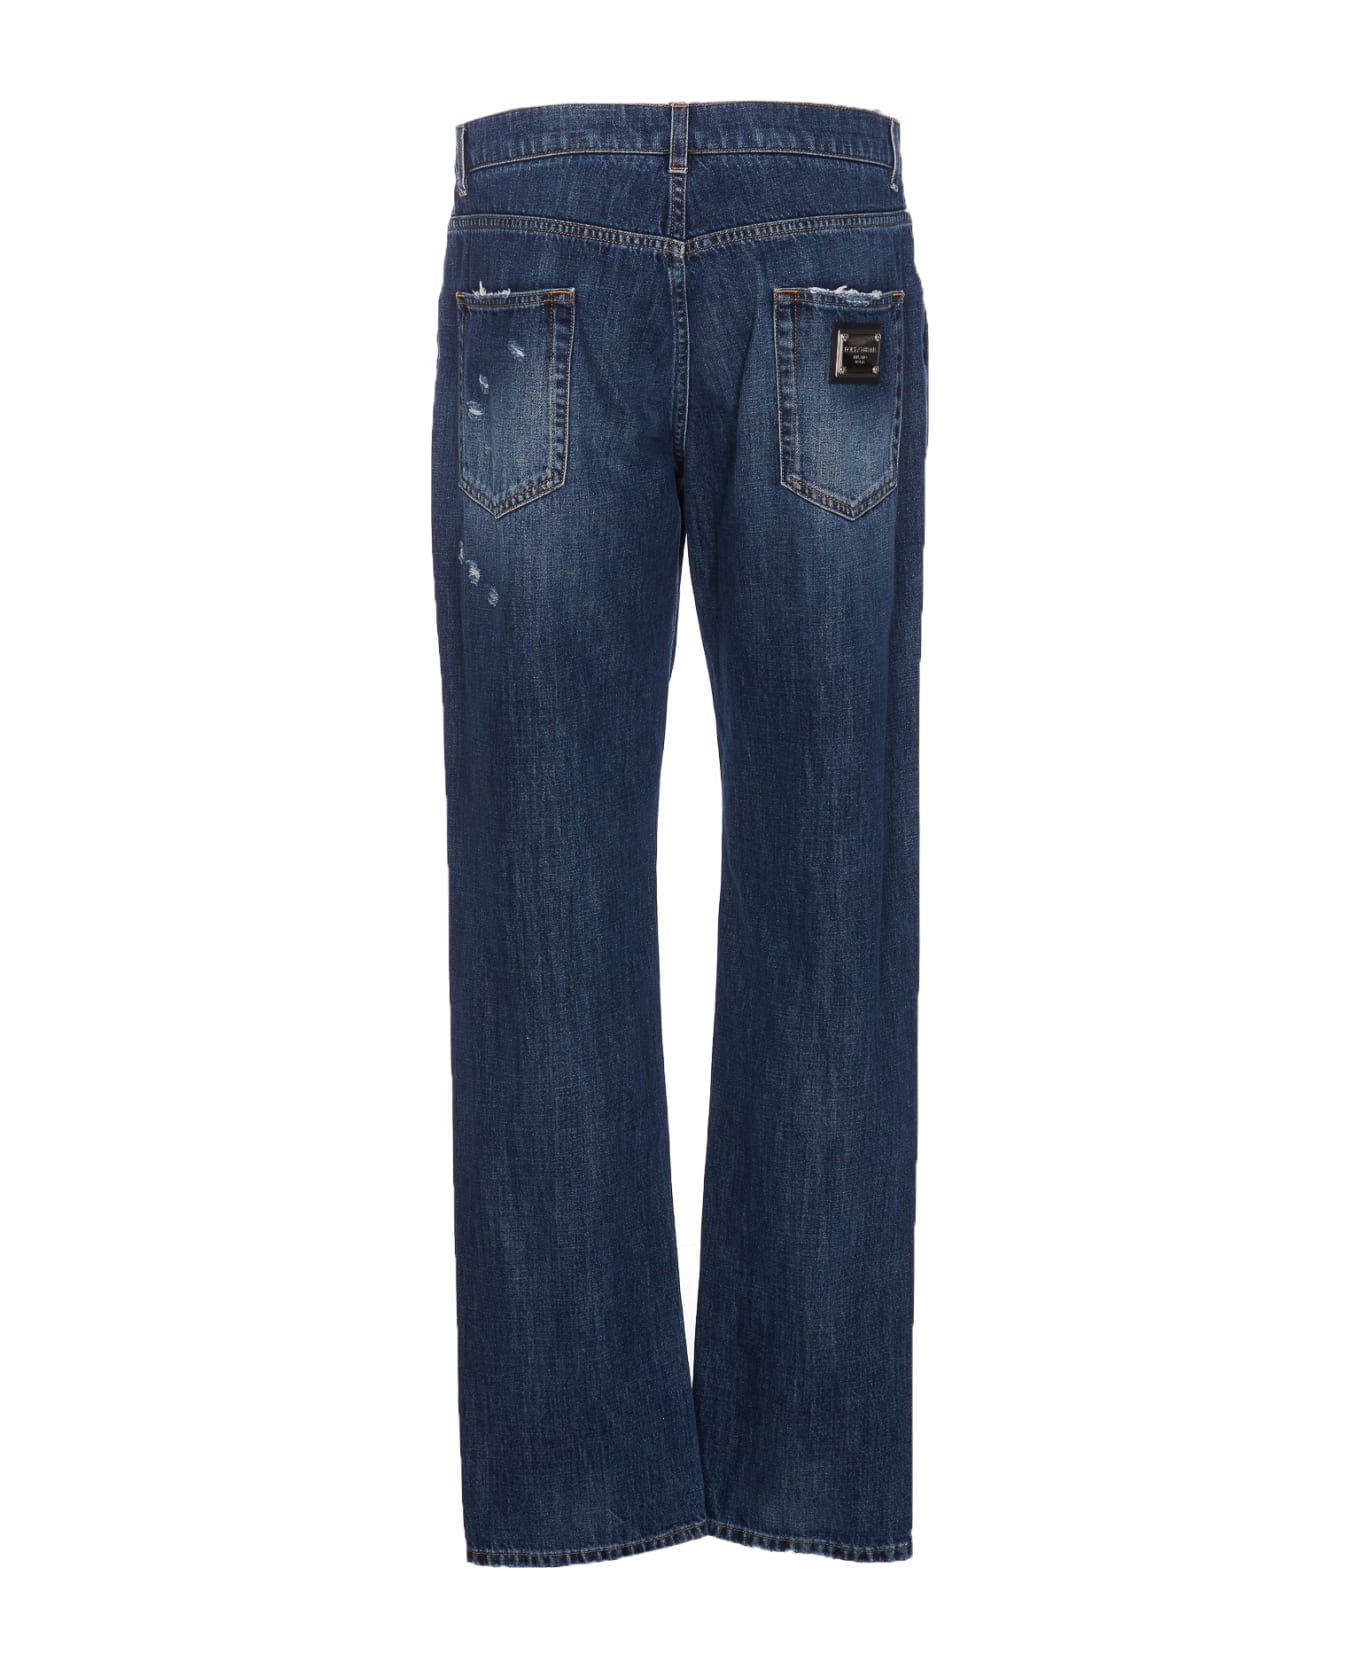 Dolce & Gabbana Jeans With Scraping - Blue デニム